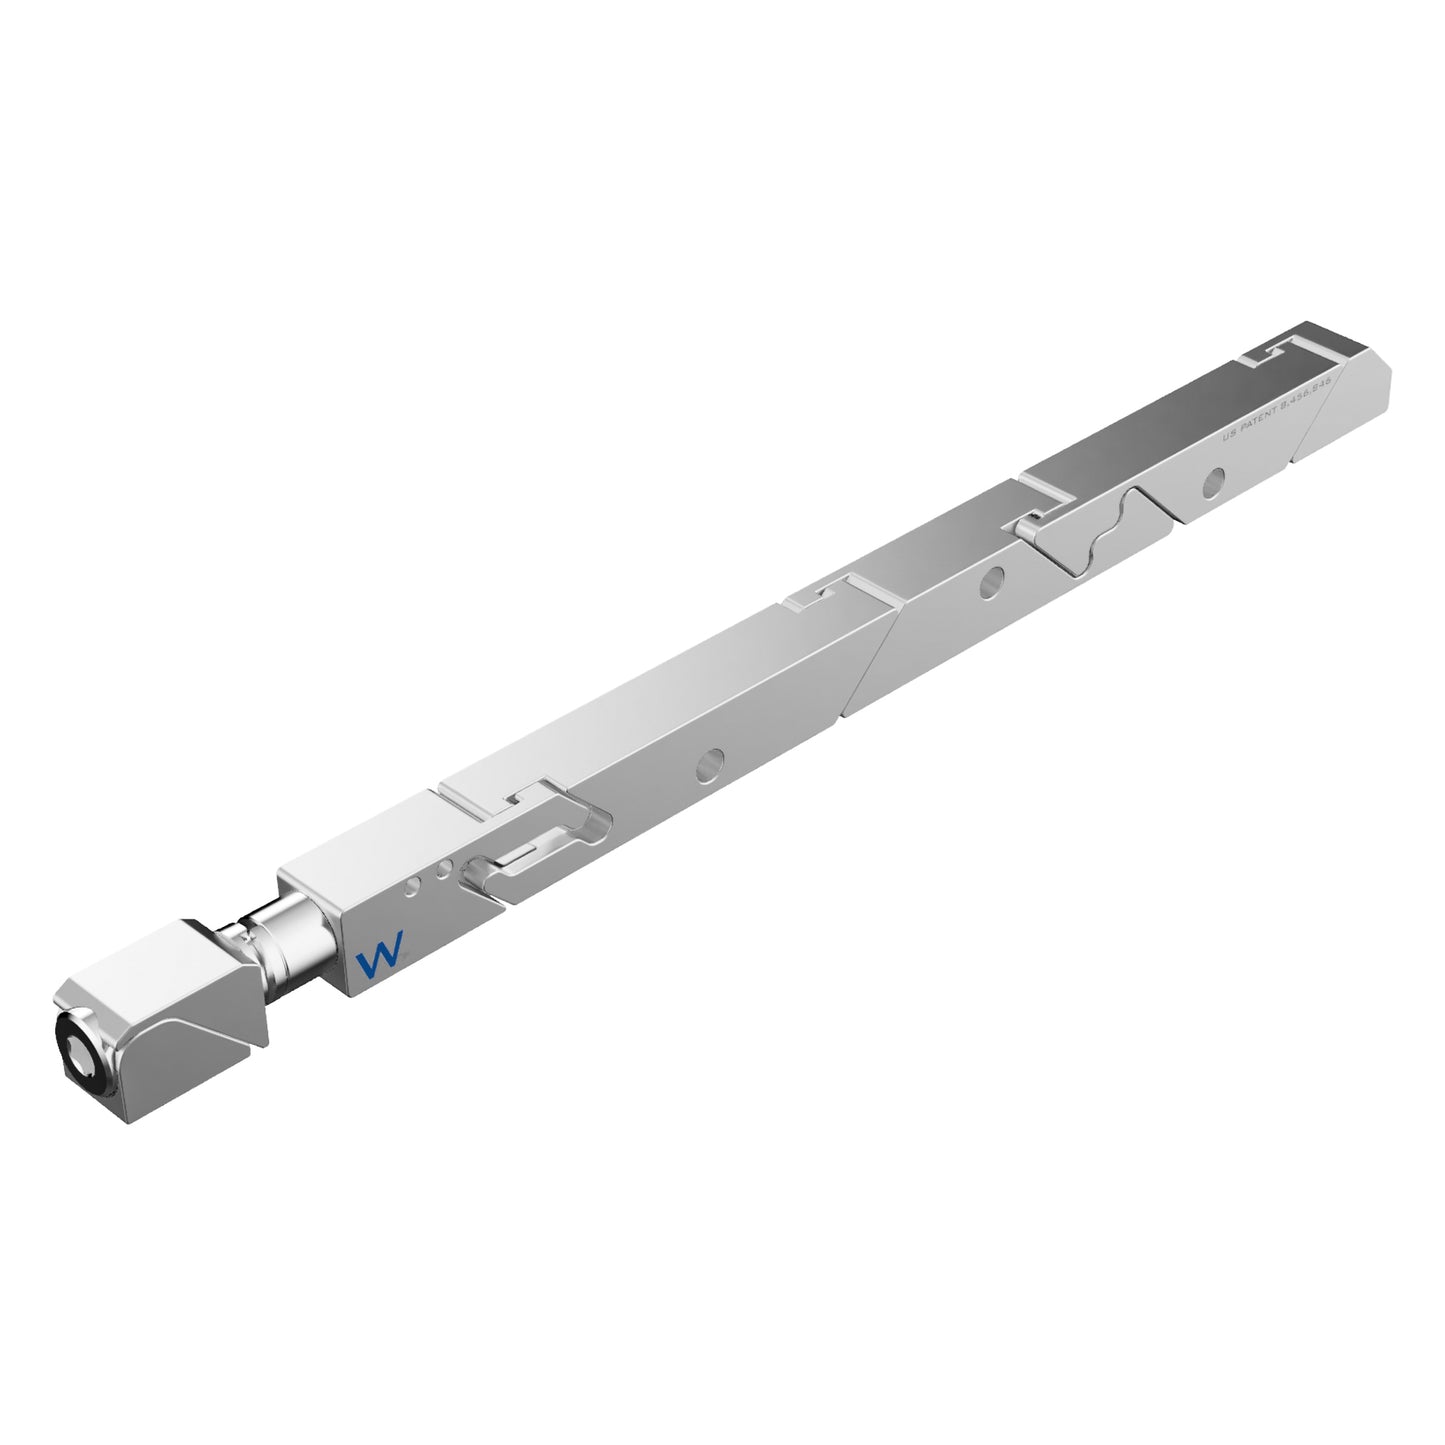 SW7-43-270-250 High Force Belleville Wedgelock, segmented long rectulangular hardware component, Clear Chemical Film Finish